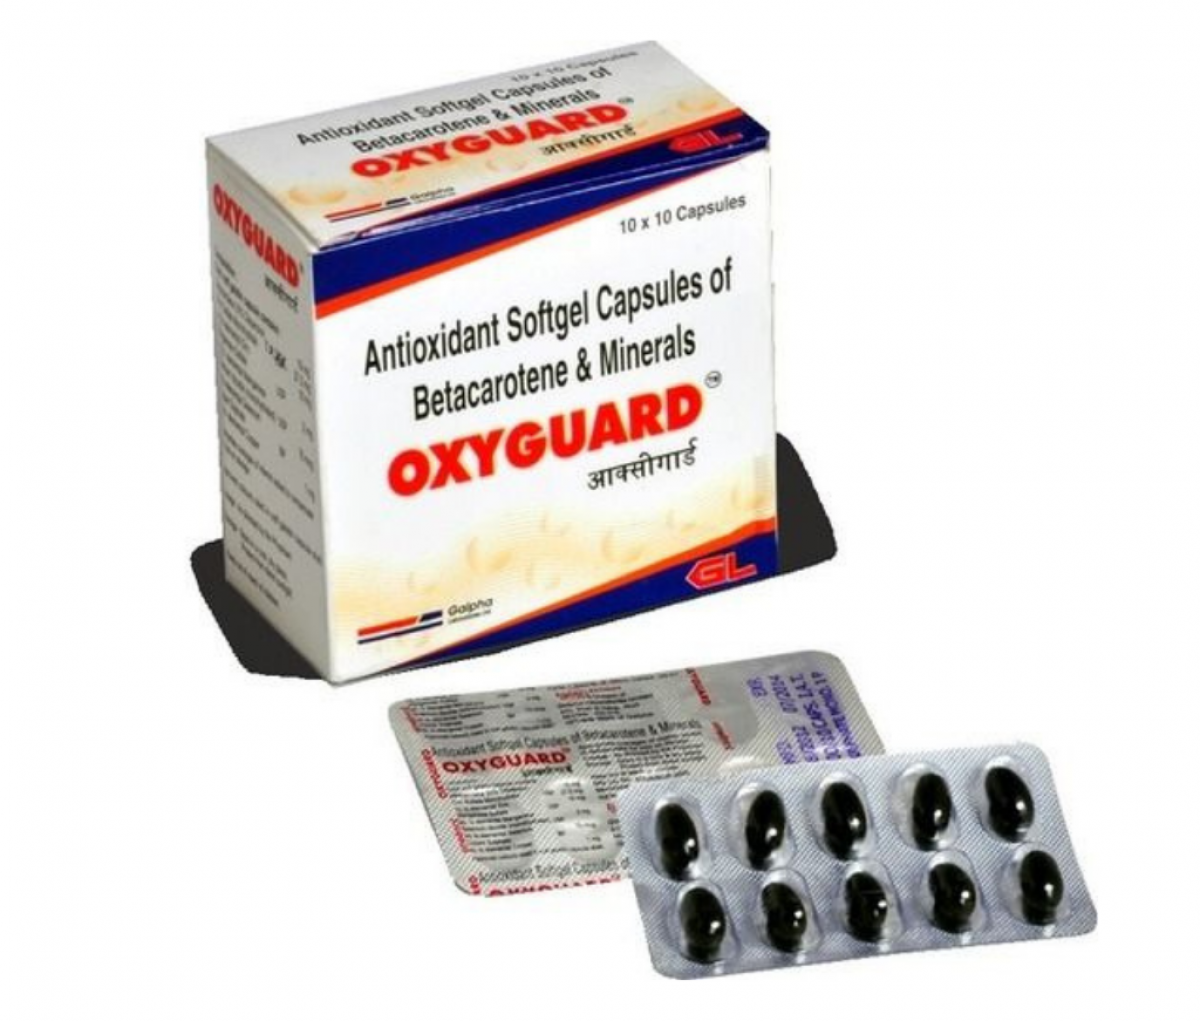 Oxigard Capsules